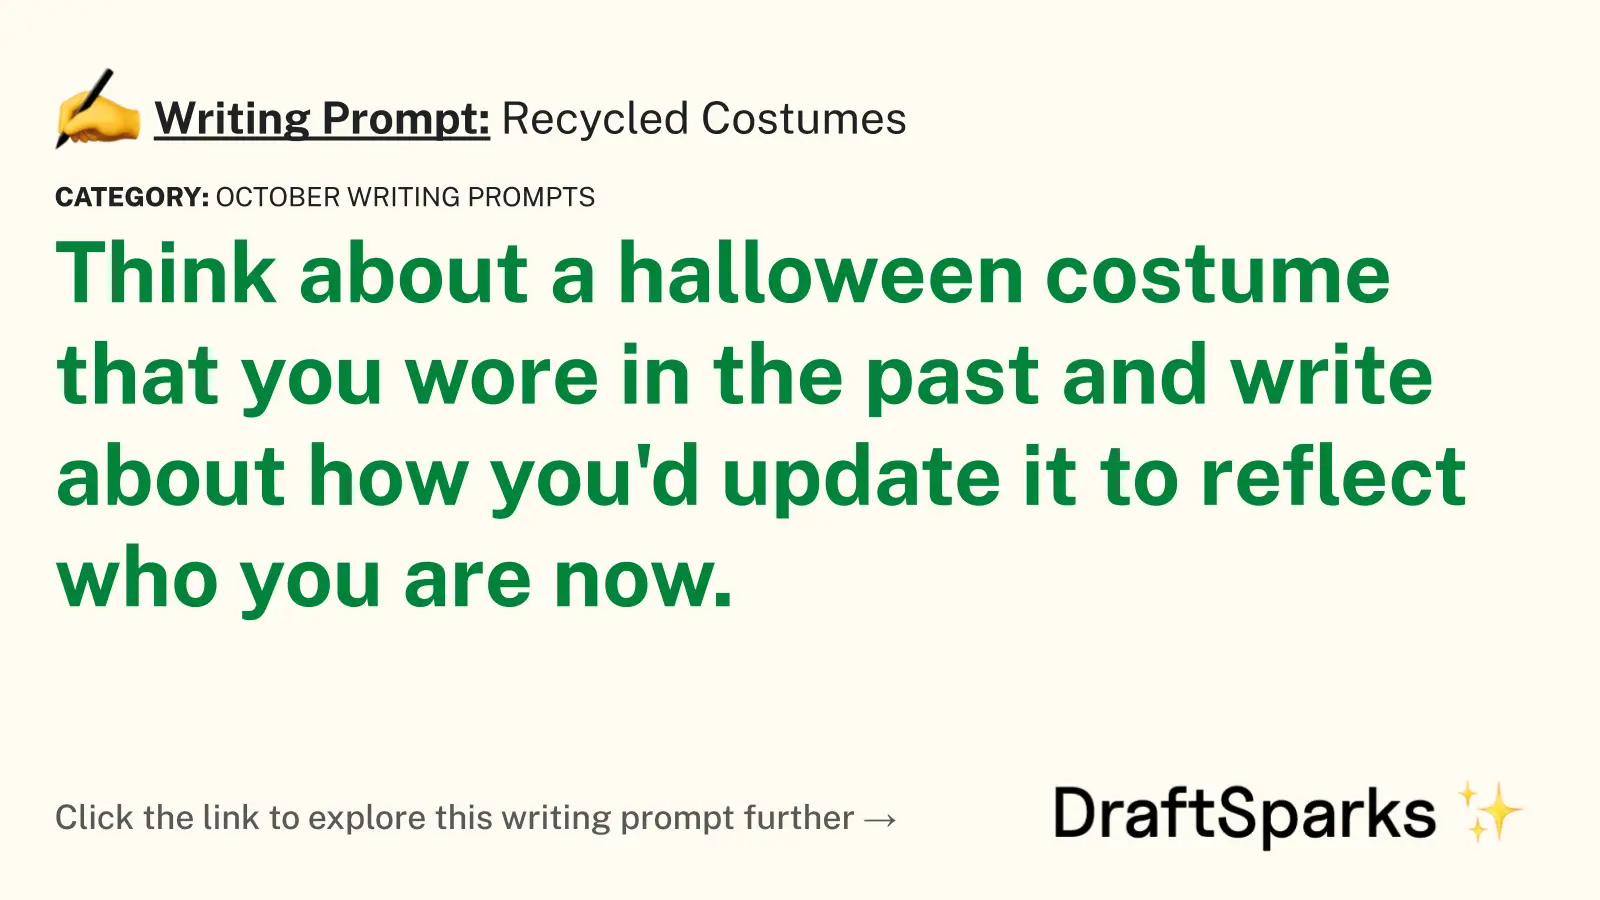 Recycled Costumes